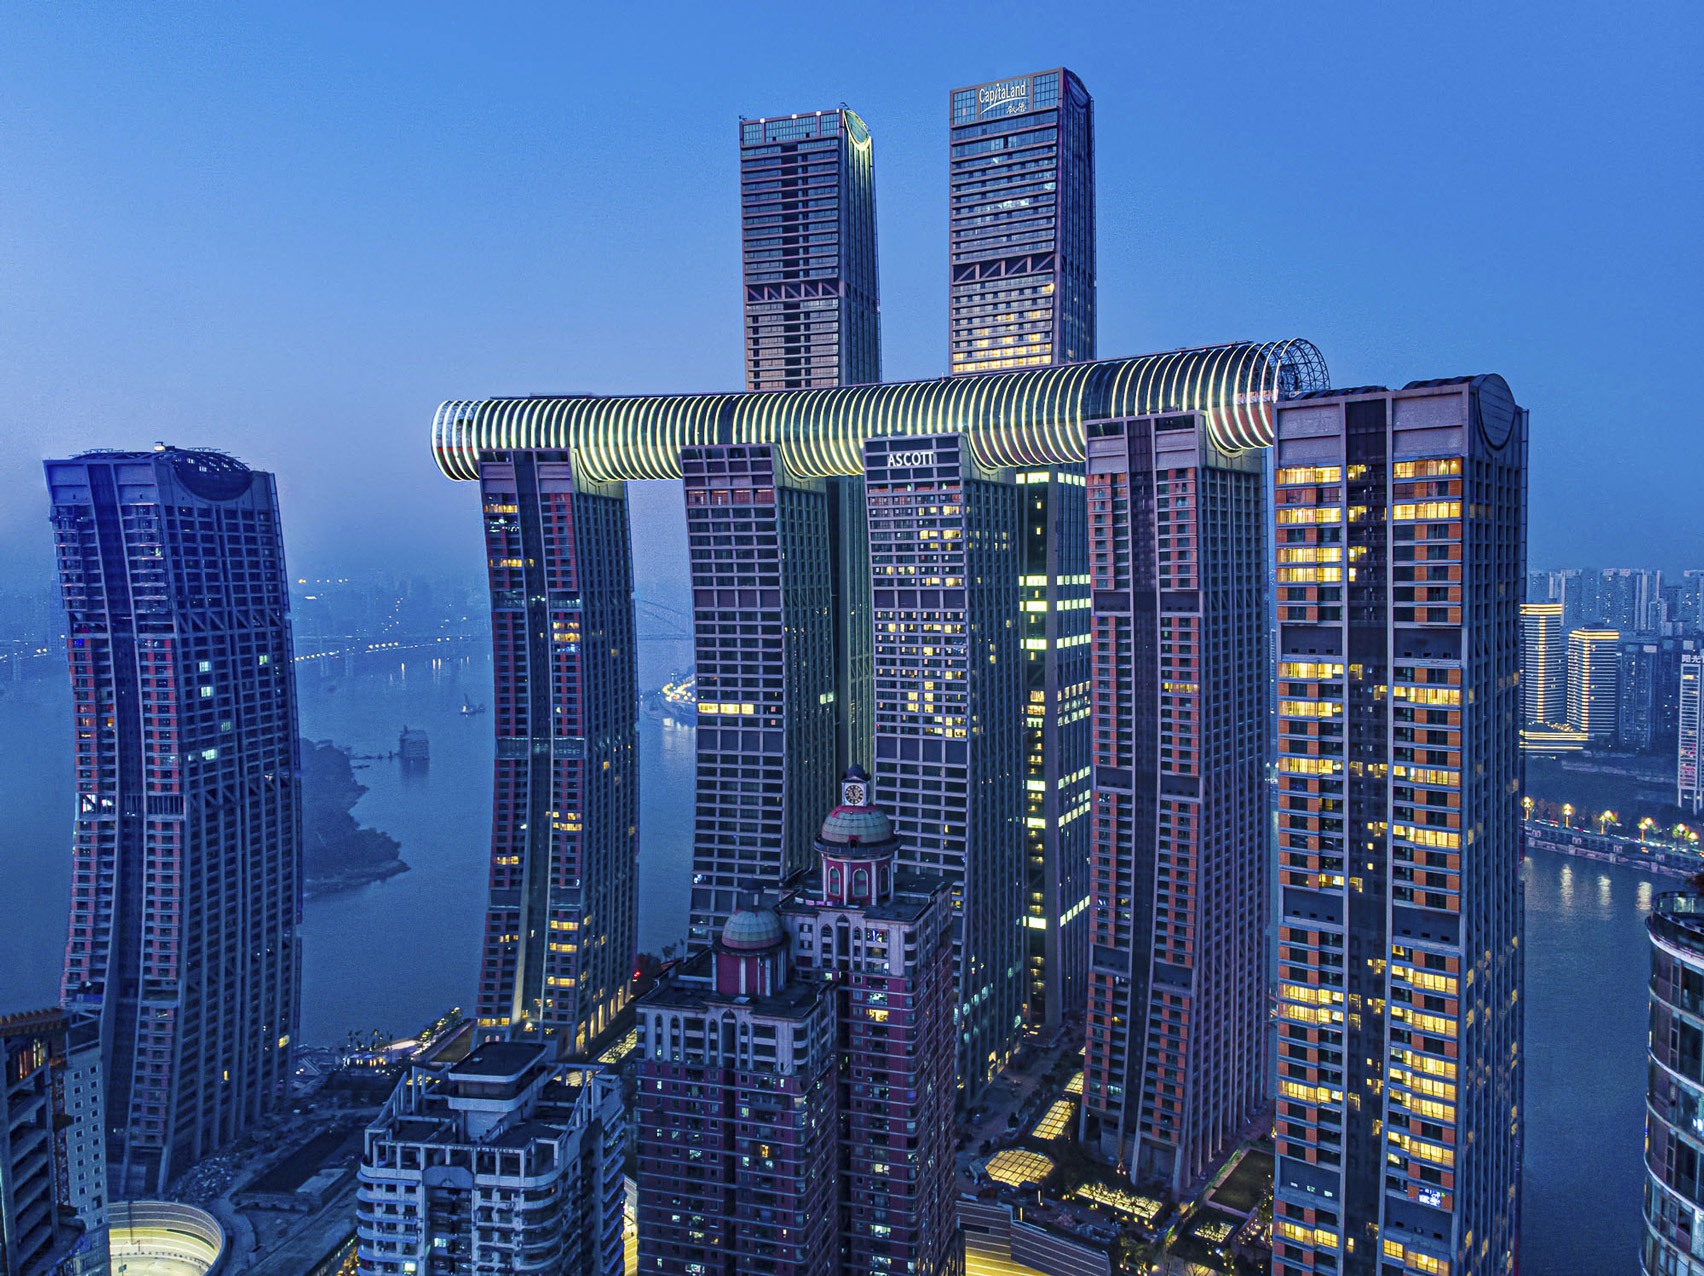 raffles-city-chongqing-the-crystal-completes-safdie-architects-col-3.jpg